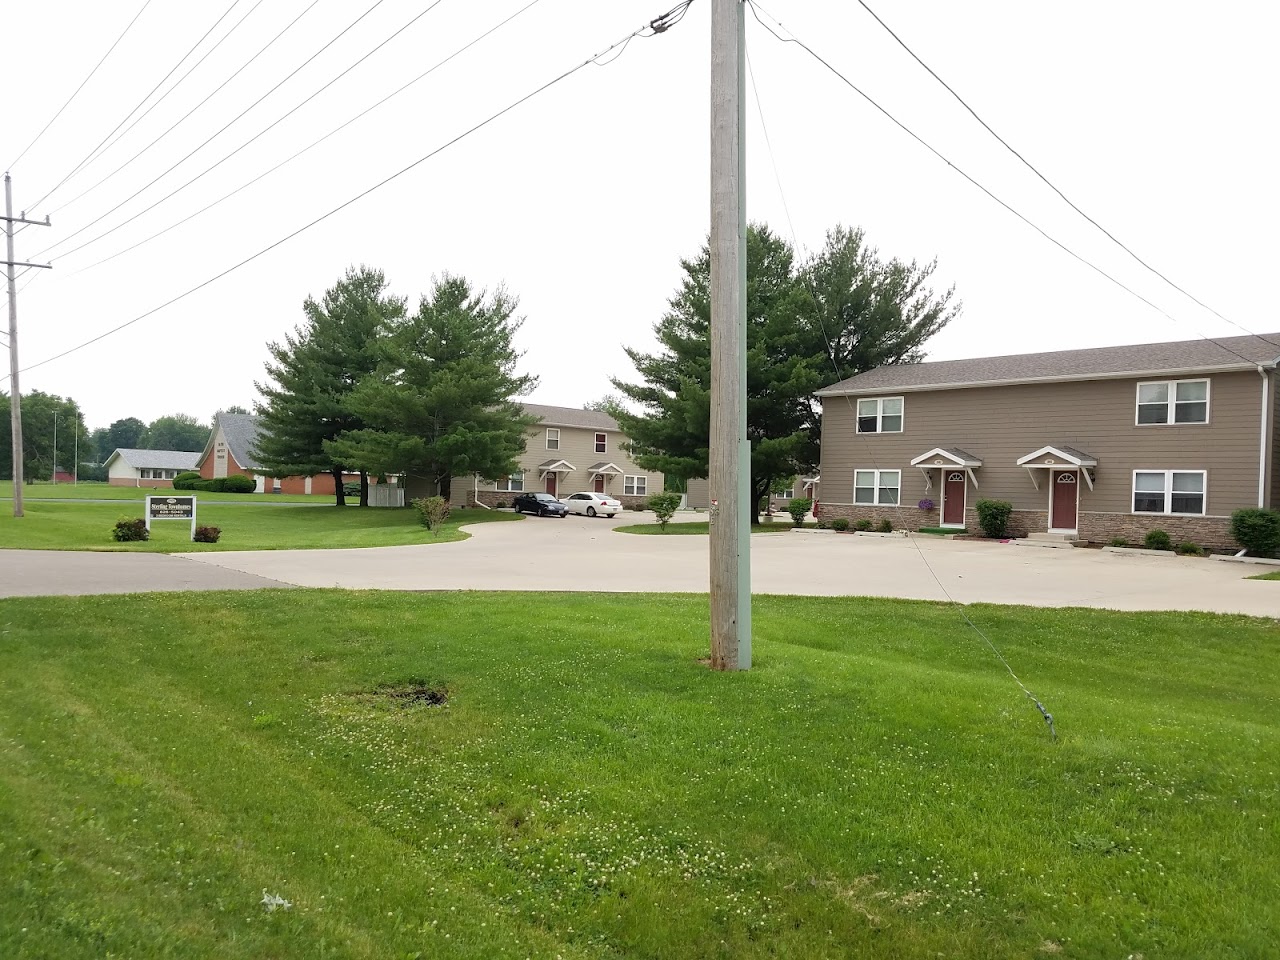 Photo of DD DEVELOPMENT OF STERLING I. Affordable housing located at 2105 FREEPORT RD STERLING, IL 61081